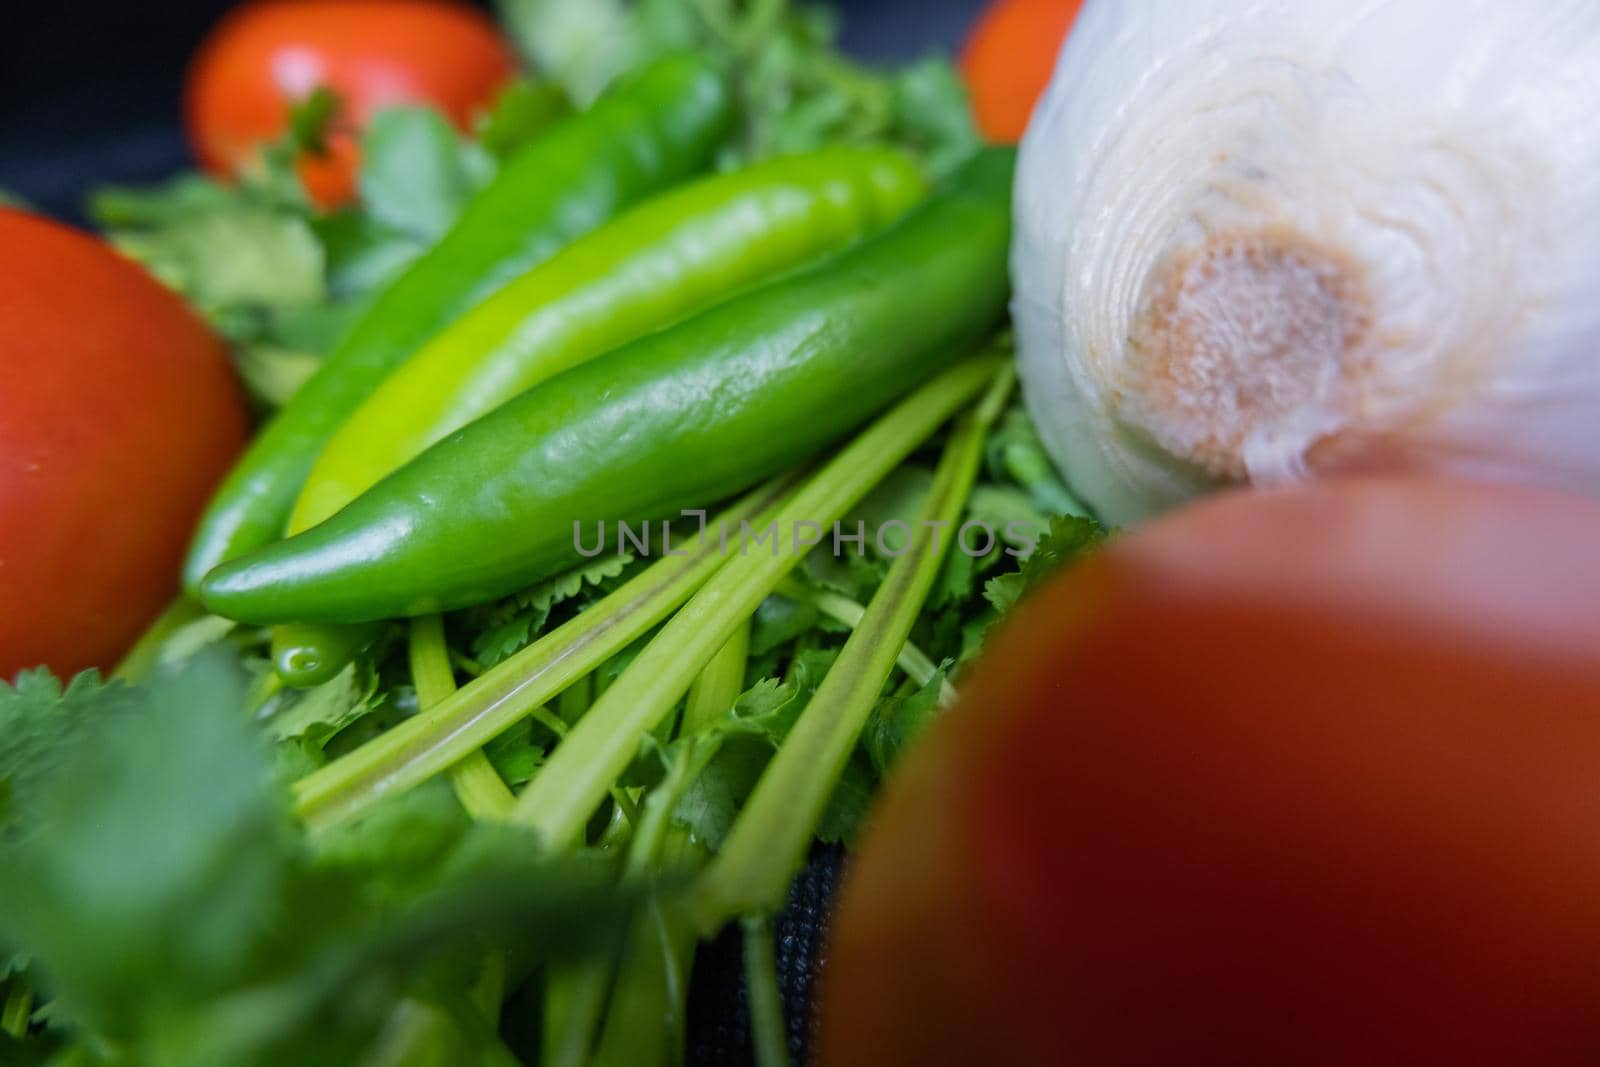 Close-up of three green chili peppers, onion, and tomato above coriander. Fresh and aromatic green, white, and red vegetables up close. Healthy meal preparation